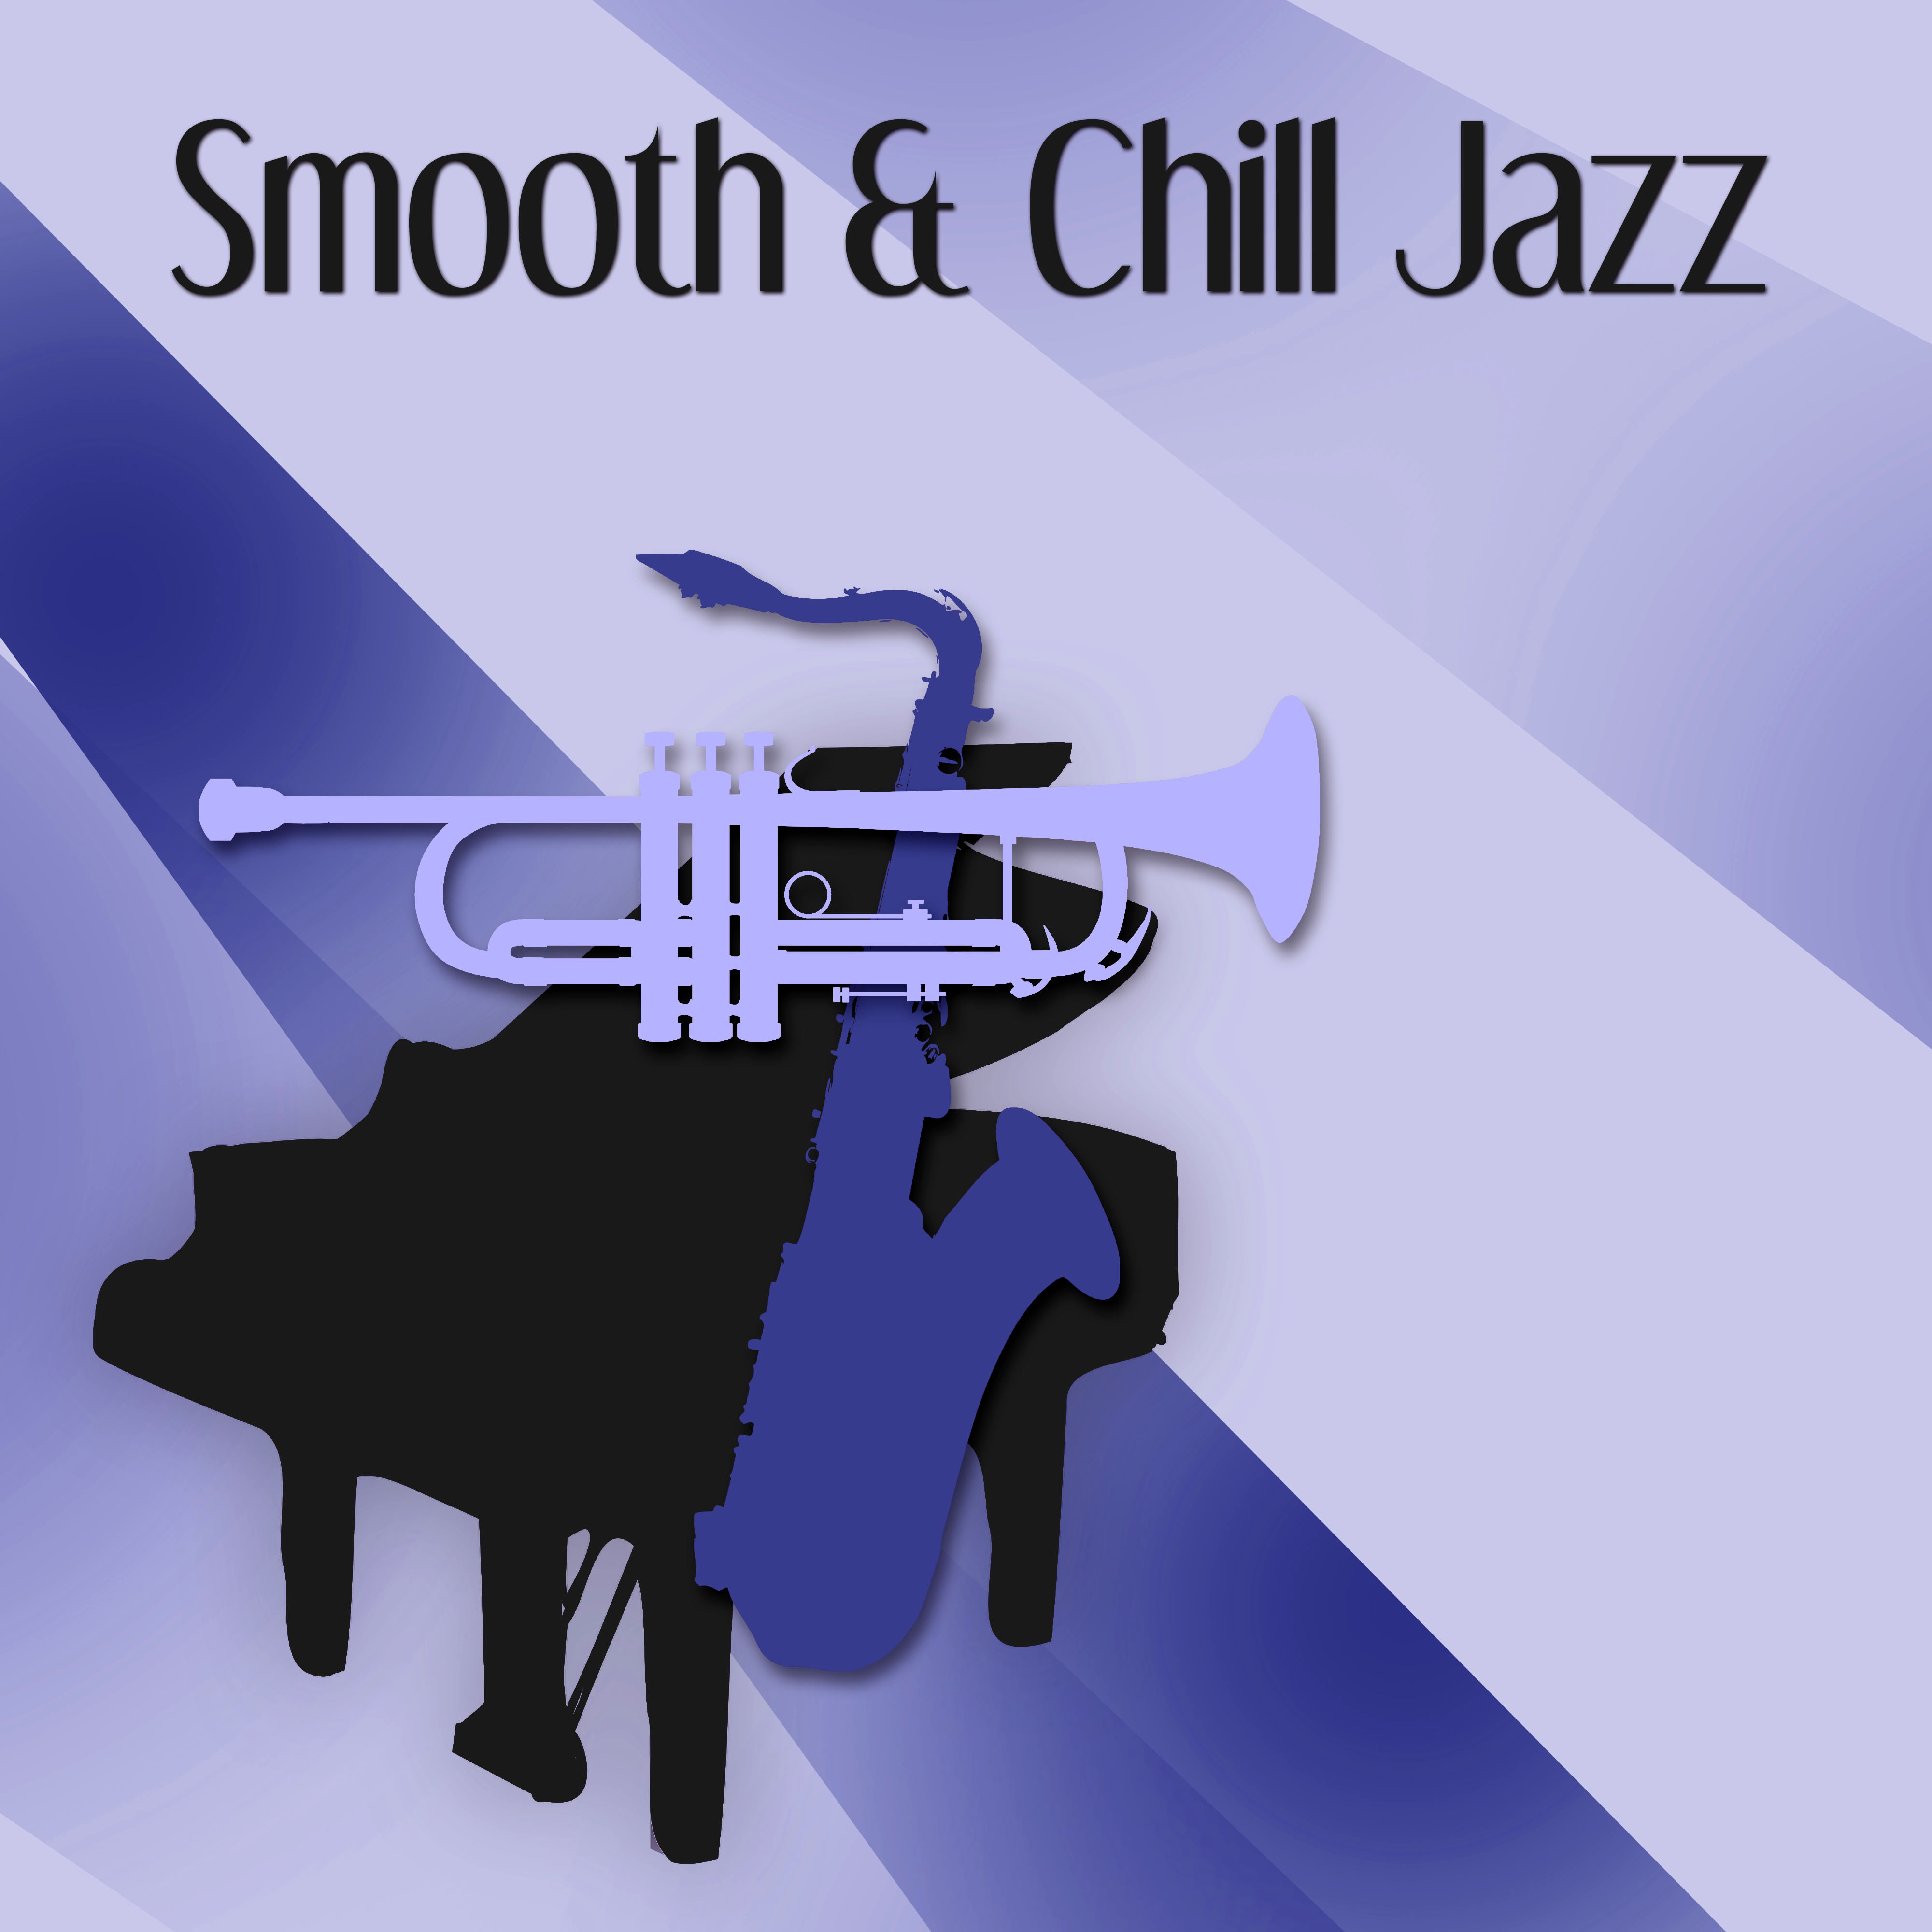 Smooth & Chill Jazz – Relax Yourself with Piano Jazz, Chilled Jazz, Background Music for Bar and Restaurant, Jazz Piano Sounds, Relaxing Coffee